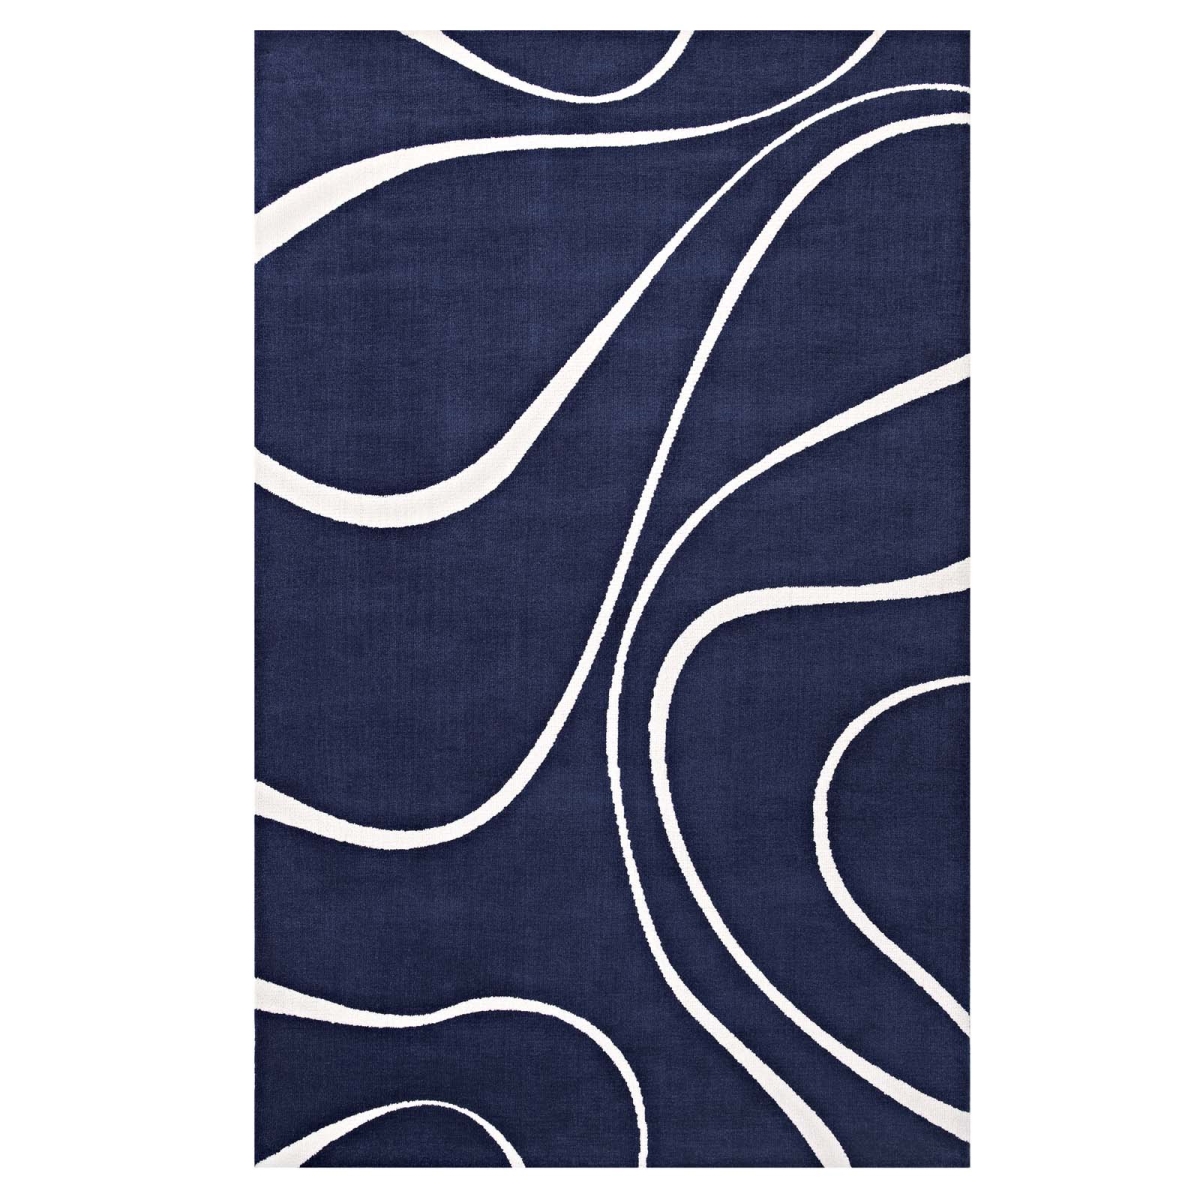 R-1002a-58 5 X 8 Ft. Therese Abstract Swirl Polyester Area Rug - Navy & Ivory, 0.5 X 60 X 96 In.